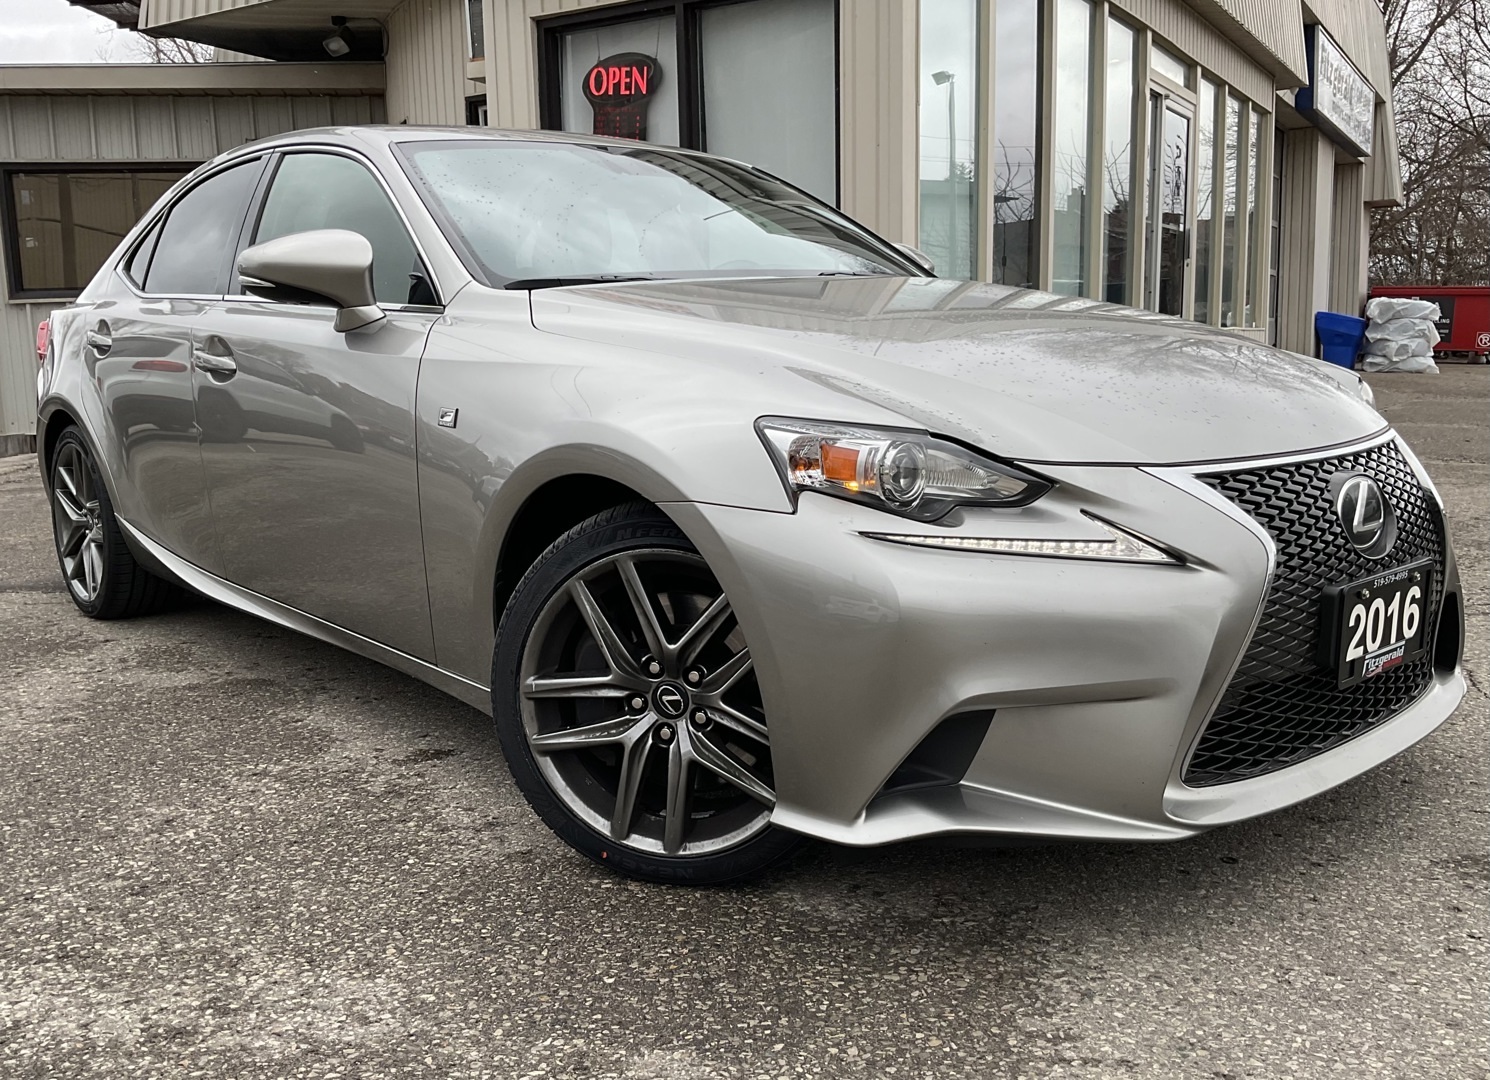 2016 Lexus IS 300 AWD - F SPORT 2! LEATHER! NAV! BACK-UP CAM! BS